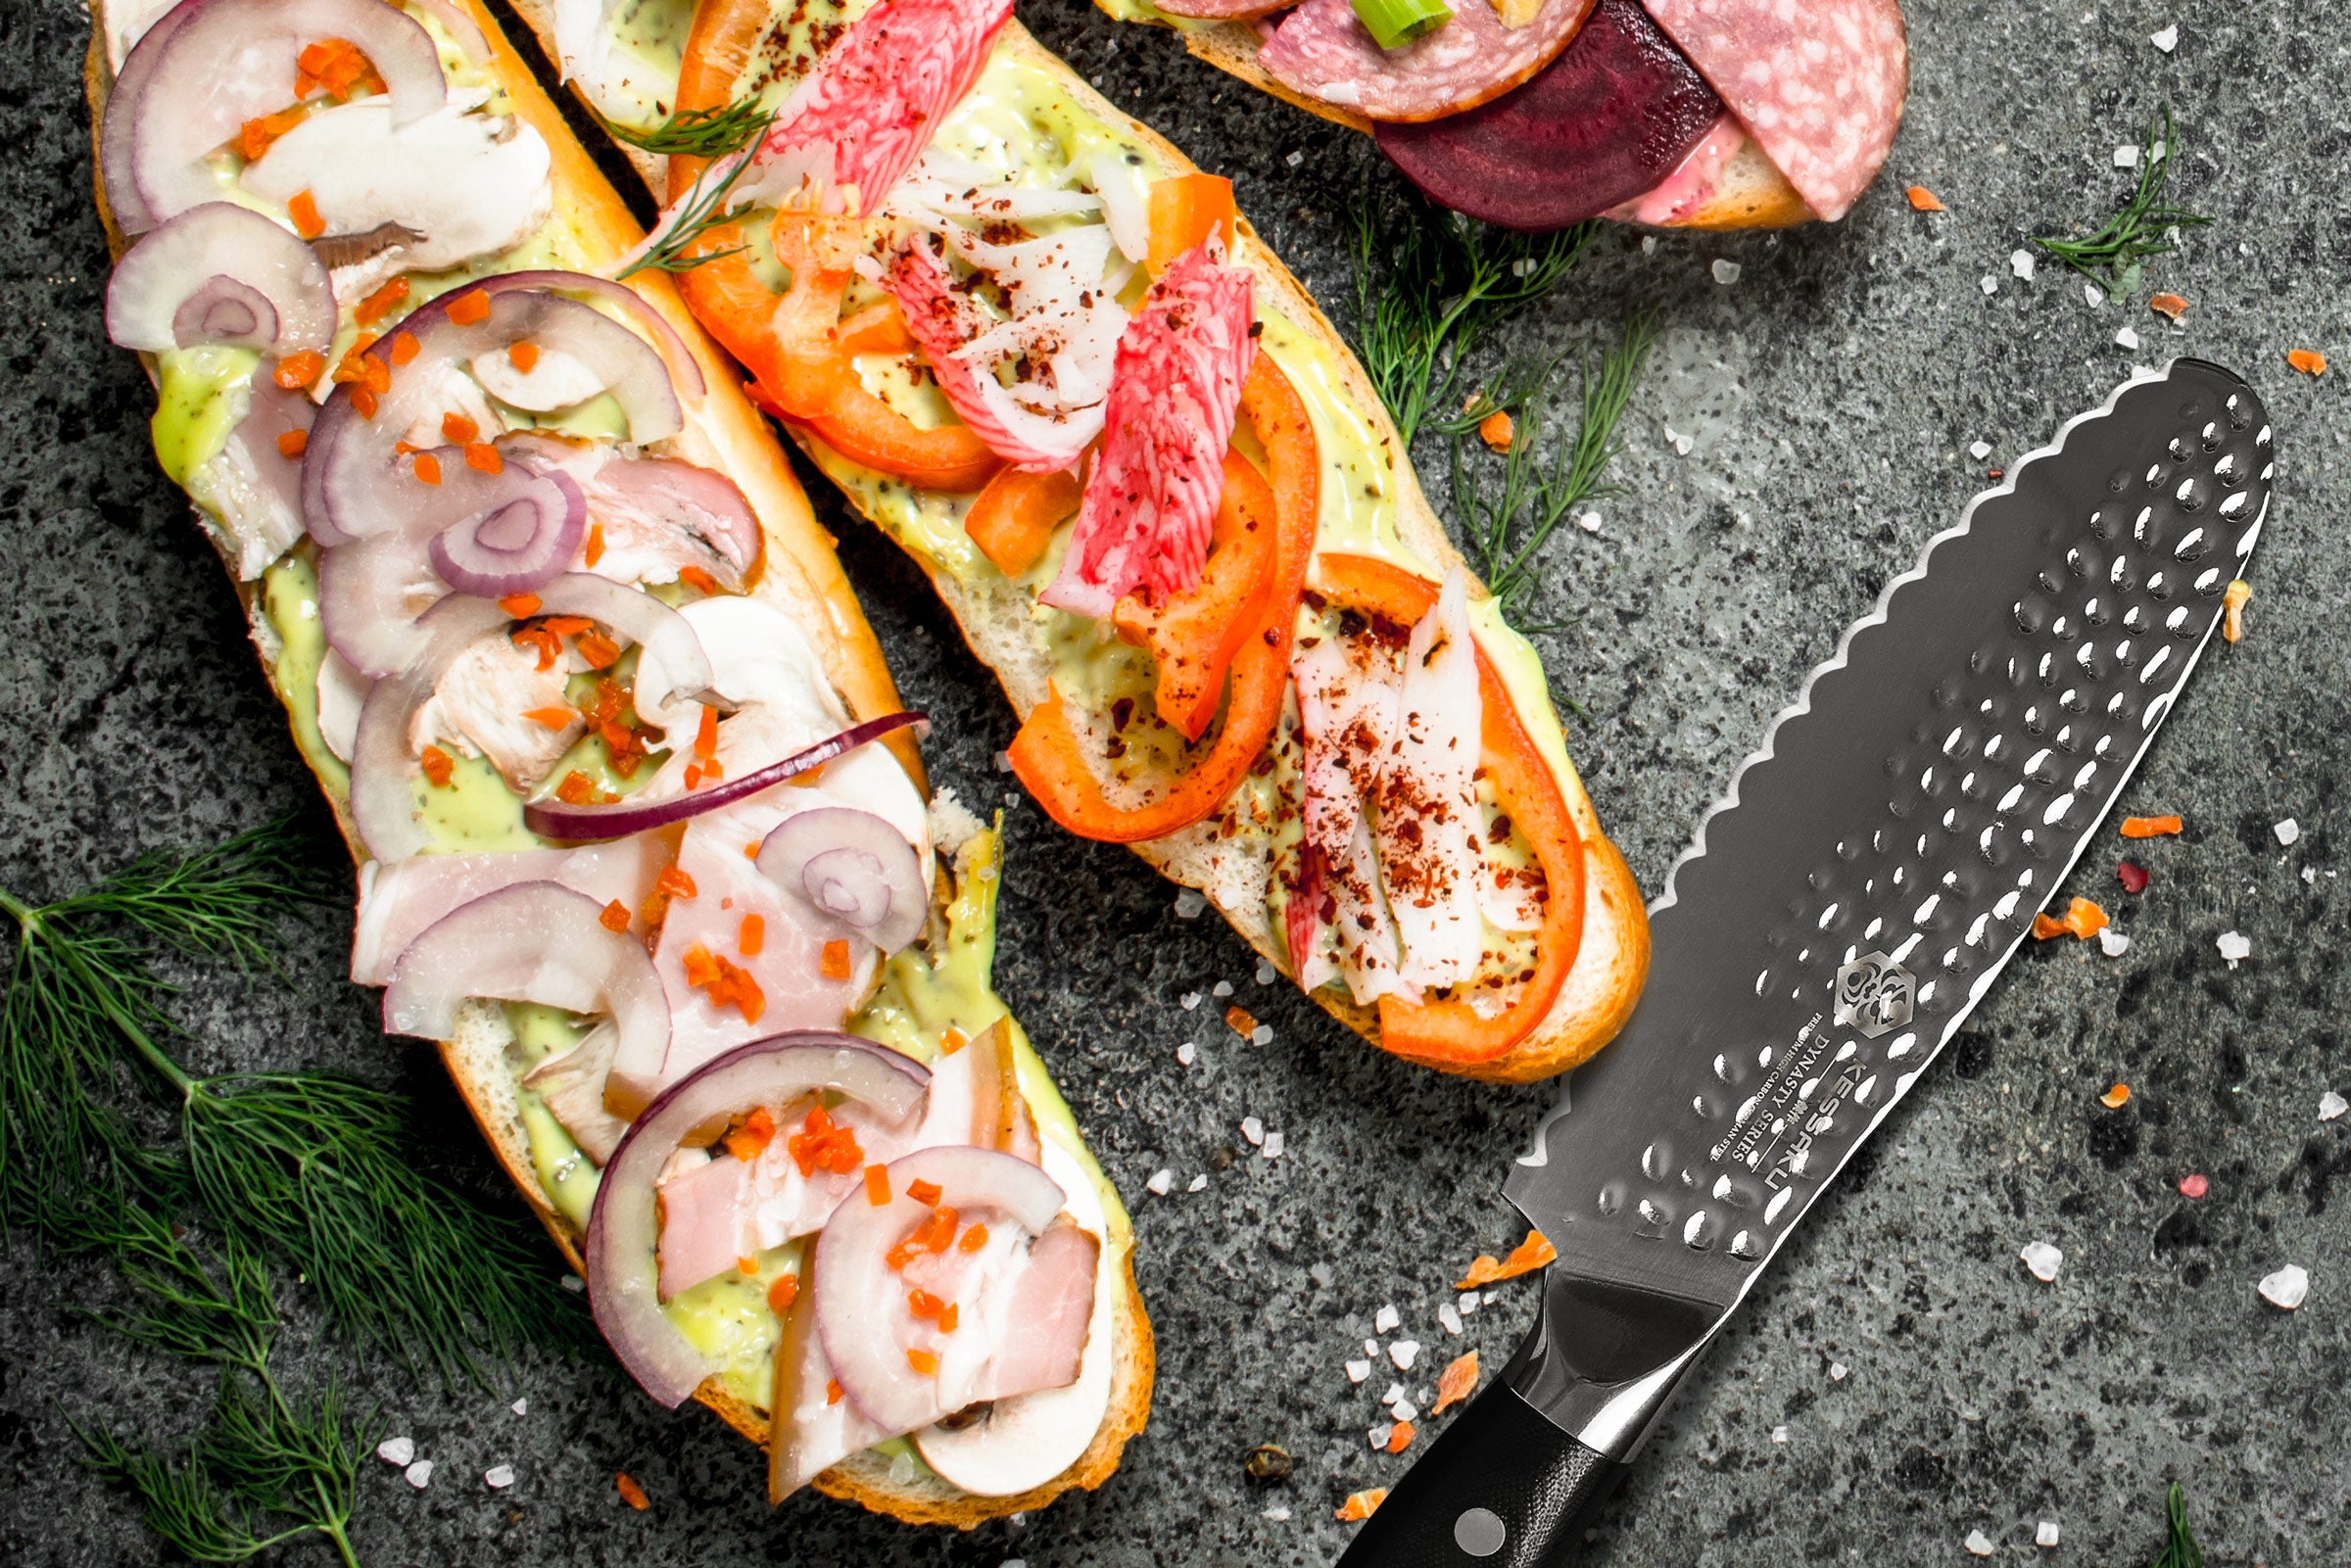 The Dynasty Serrated Sandwich Knife having just prepped three sandwiches with ingredients such as red peppers, red onions, and cured meats.